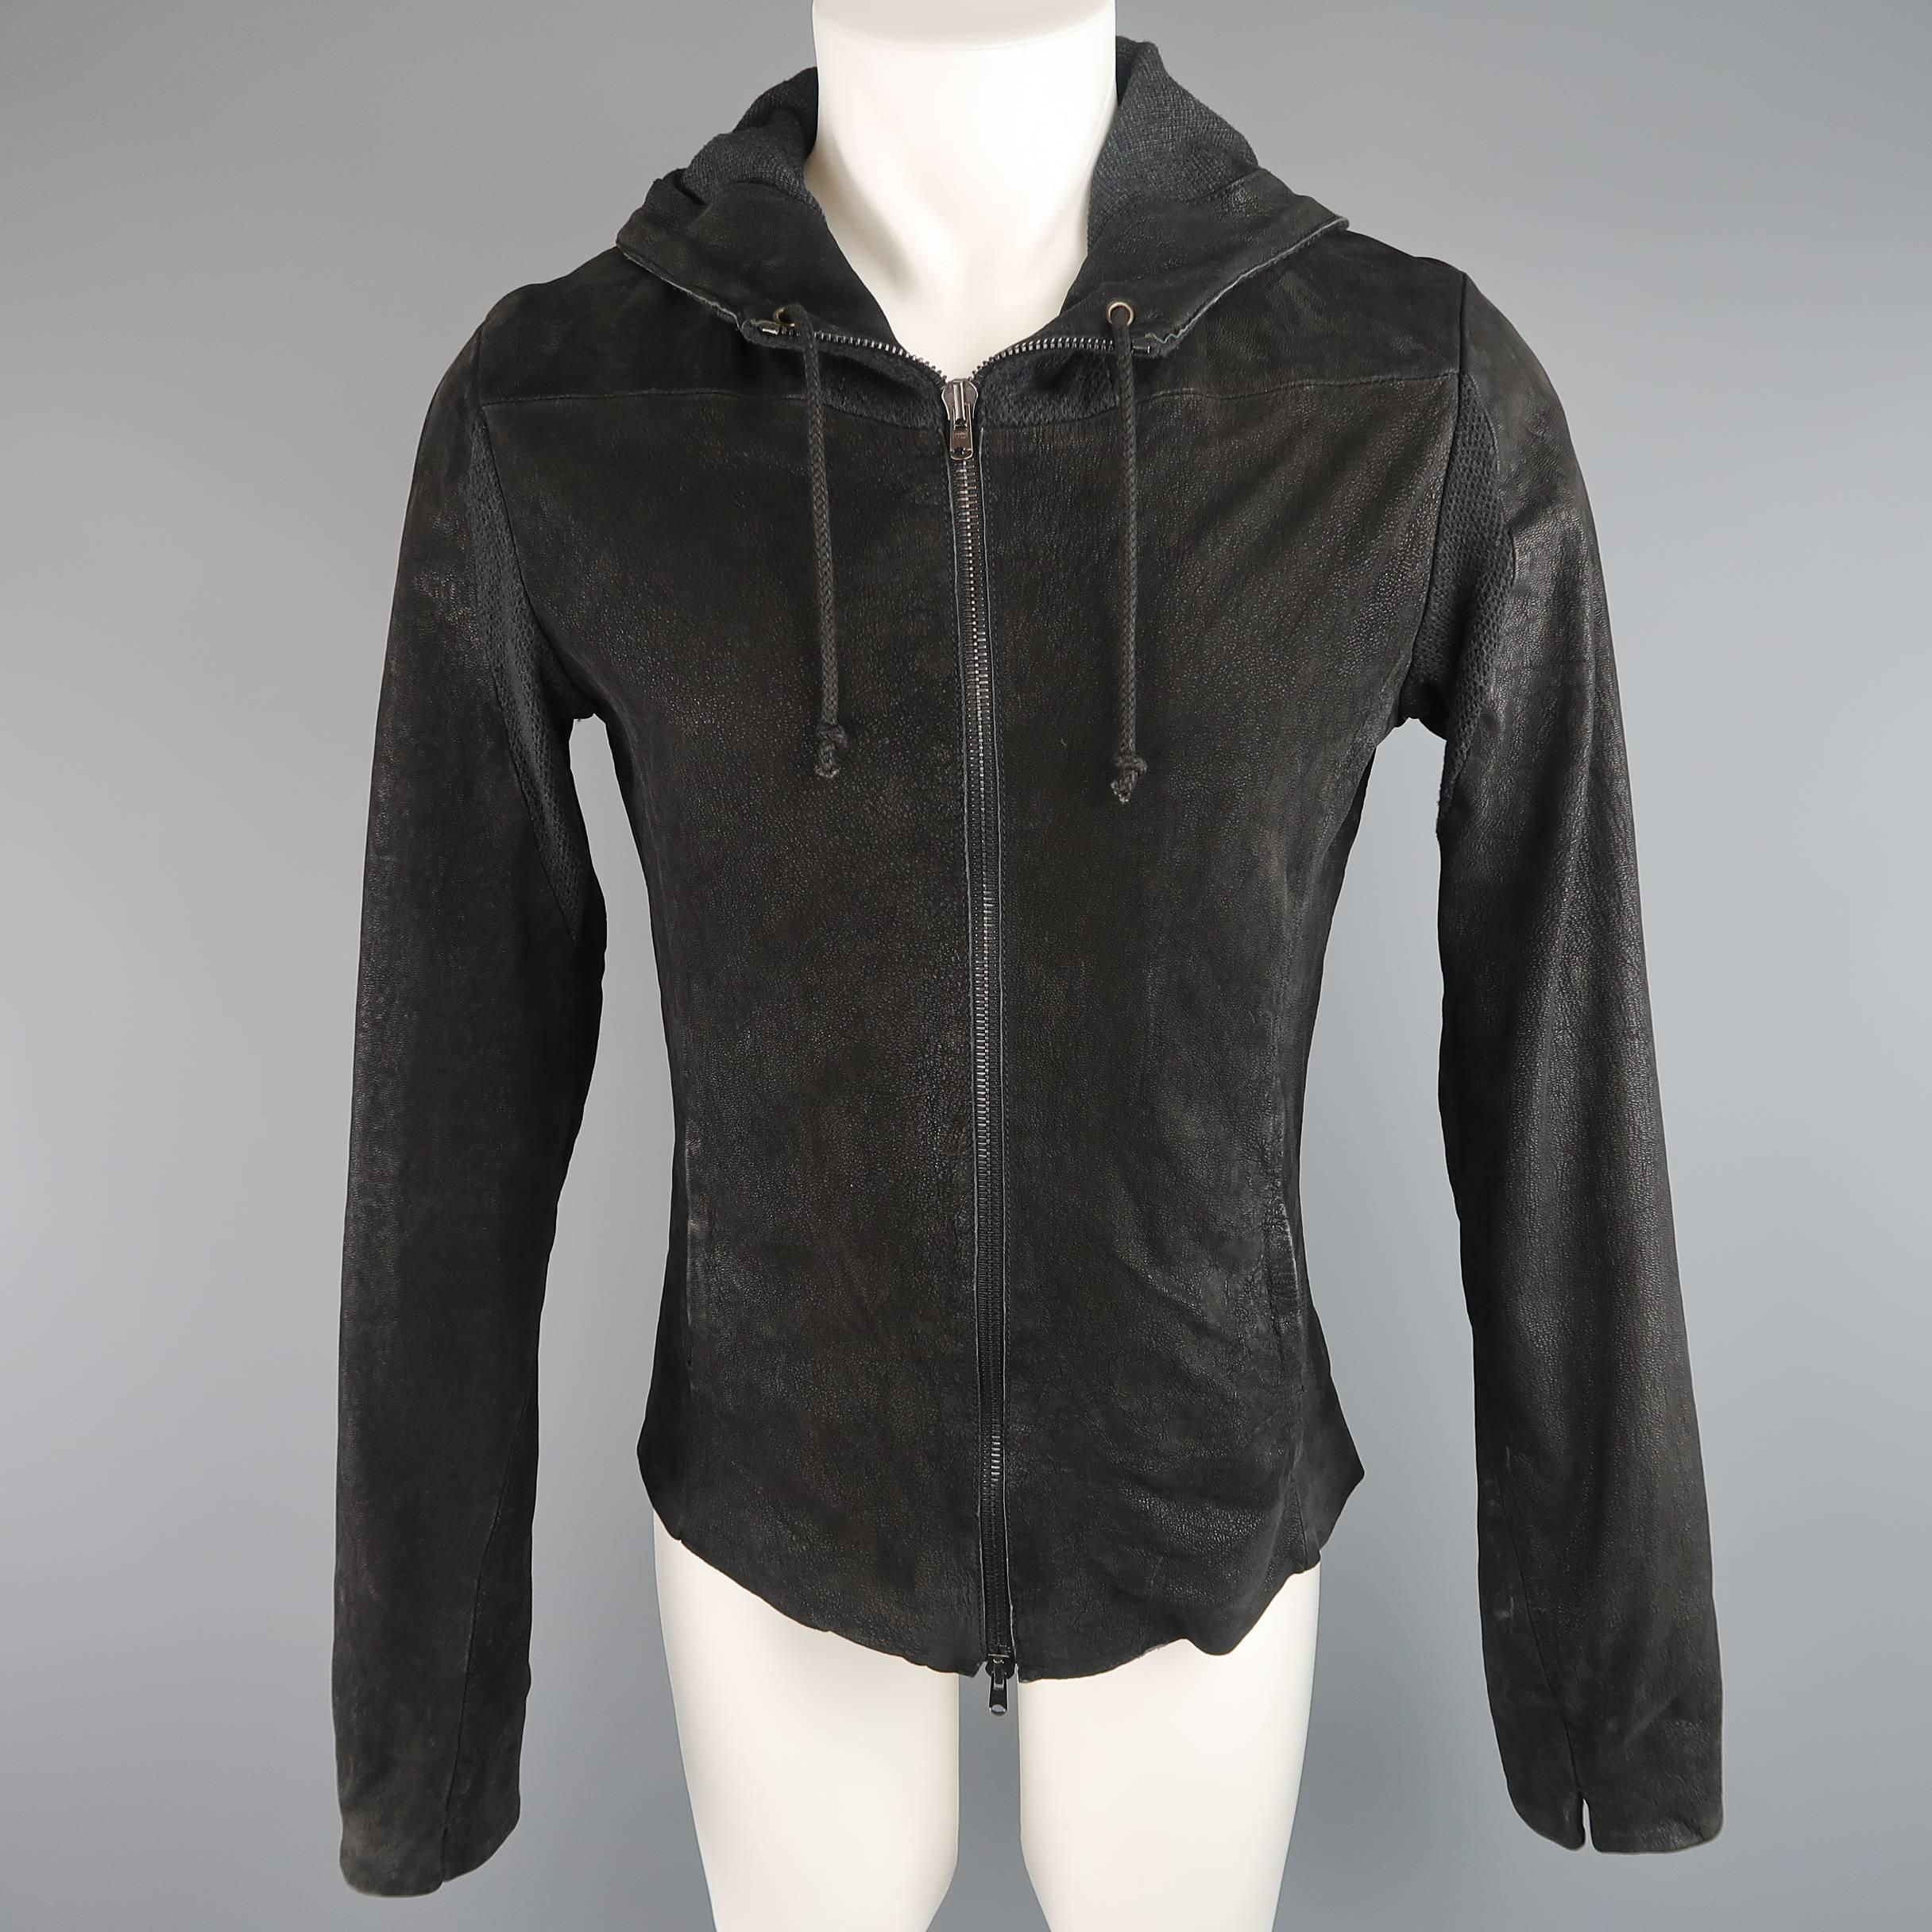 LOST & FOUND jacket comes in a distressed sueded textured goat leather and features a high neck with hood, double zip front, slit pockets, and knit panels. Made in Italy.
 
Good Pre-Owned Condition.
Marked: S
 
Measurements:
 
Shoulder: 17.5